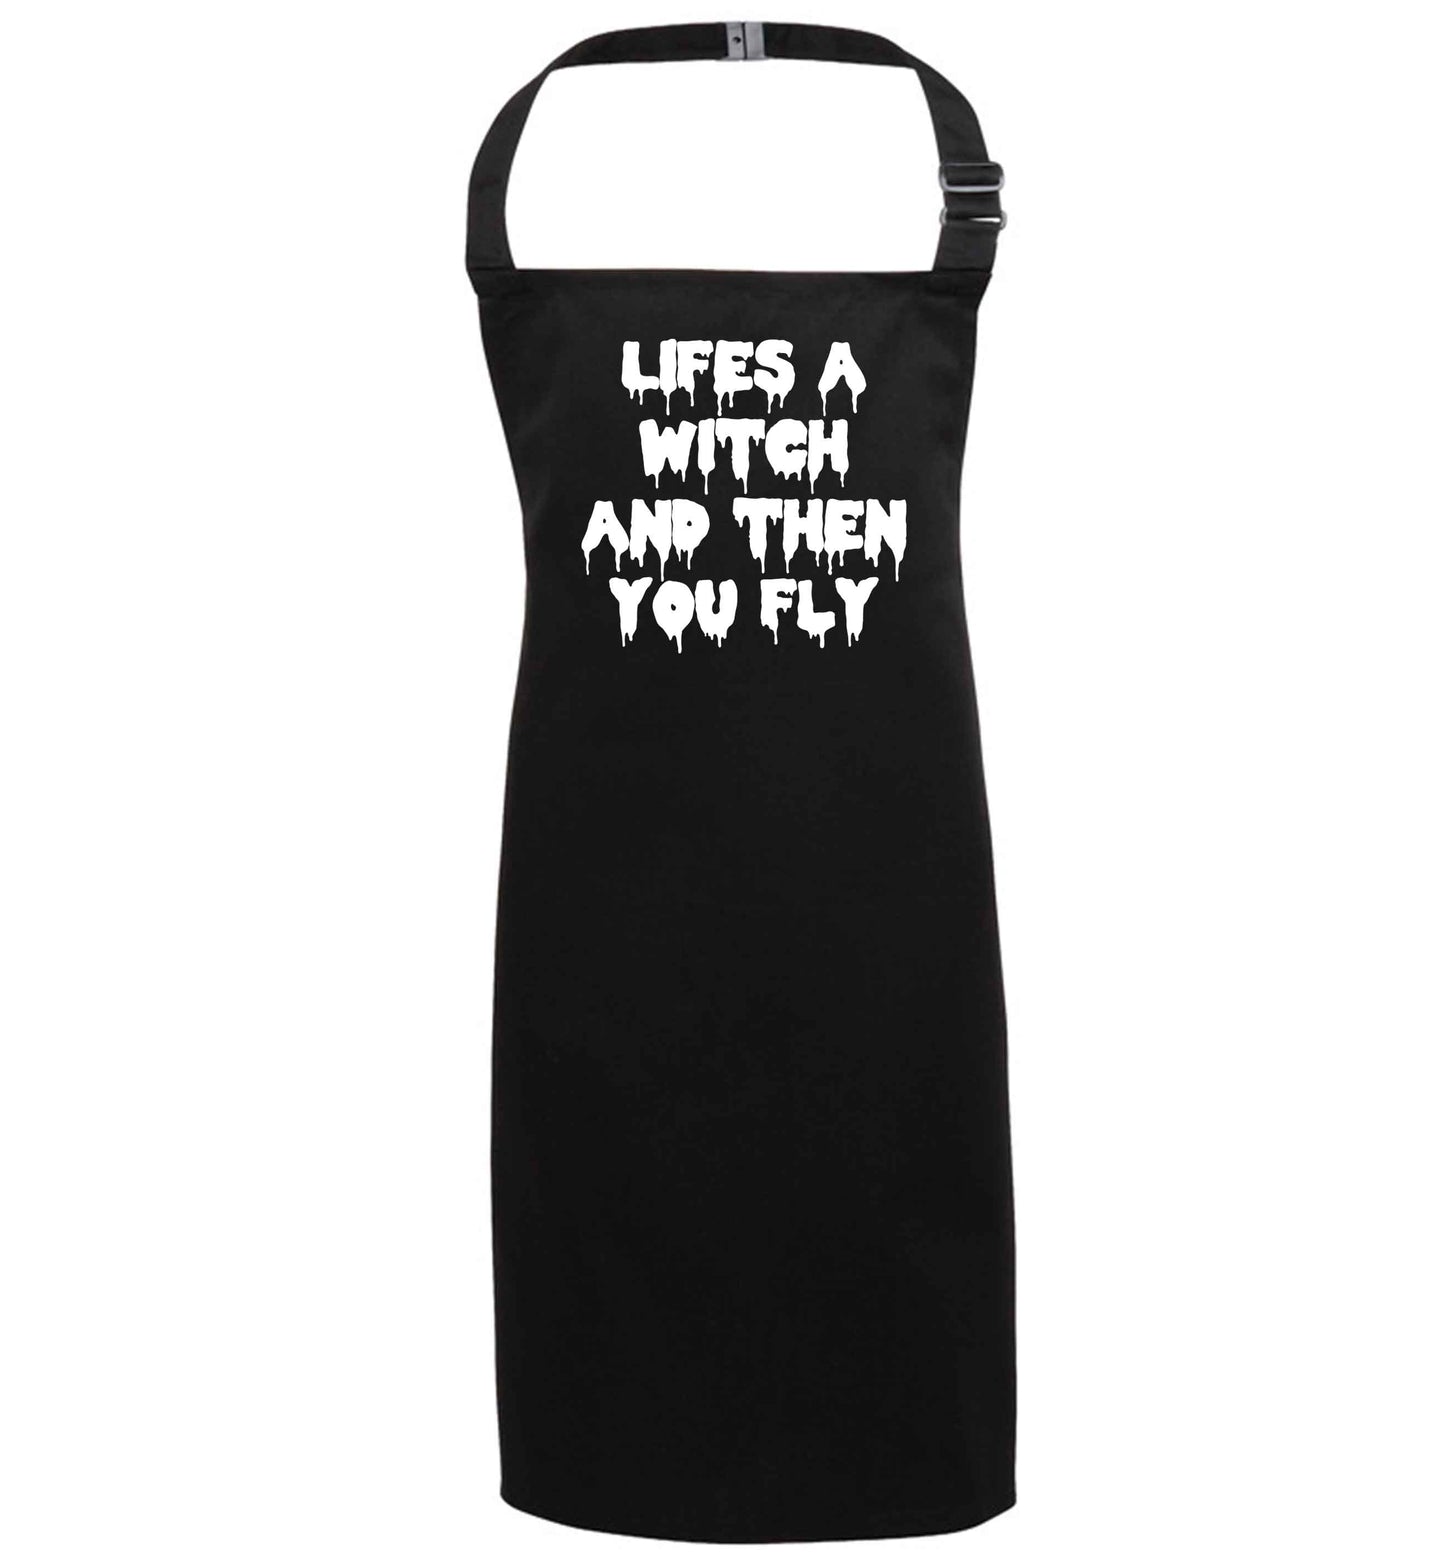 Life's a witch and then you fly black apron 7-10 years